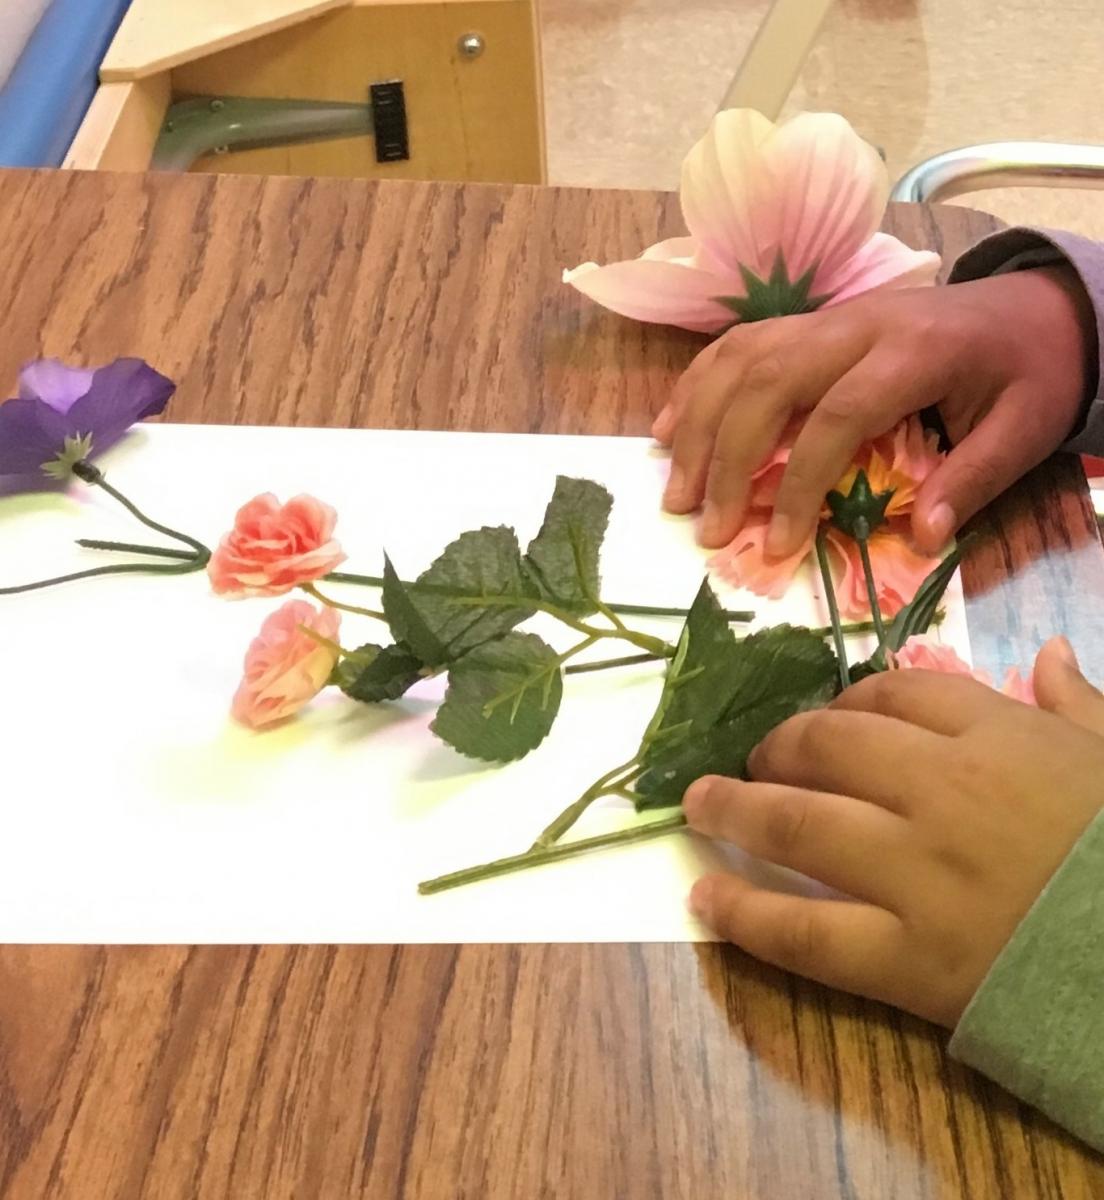 child's hands exploring the fake flowers